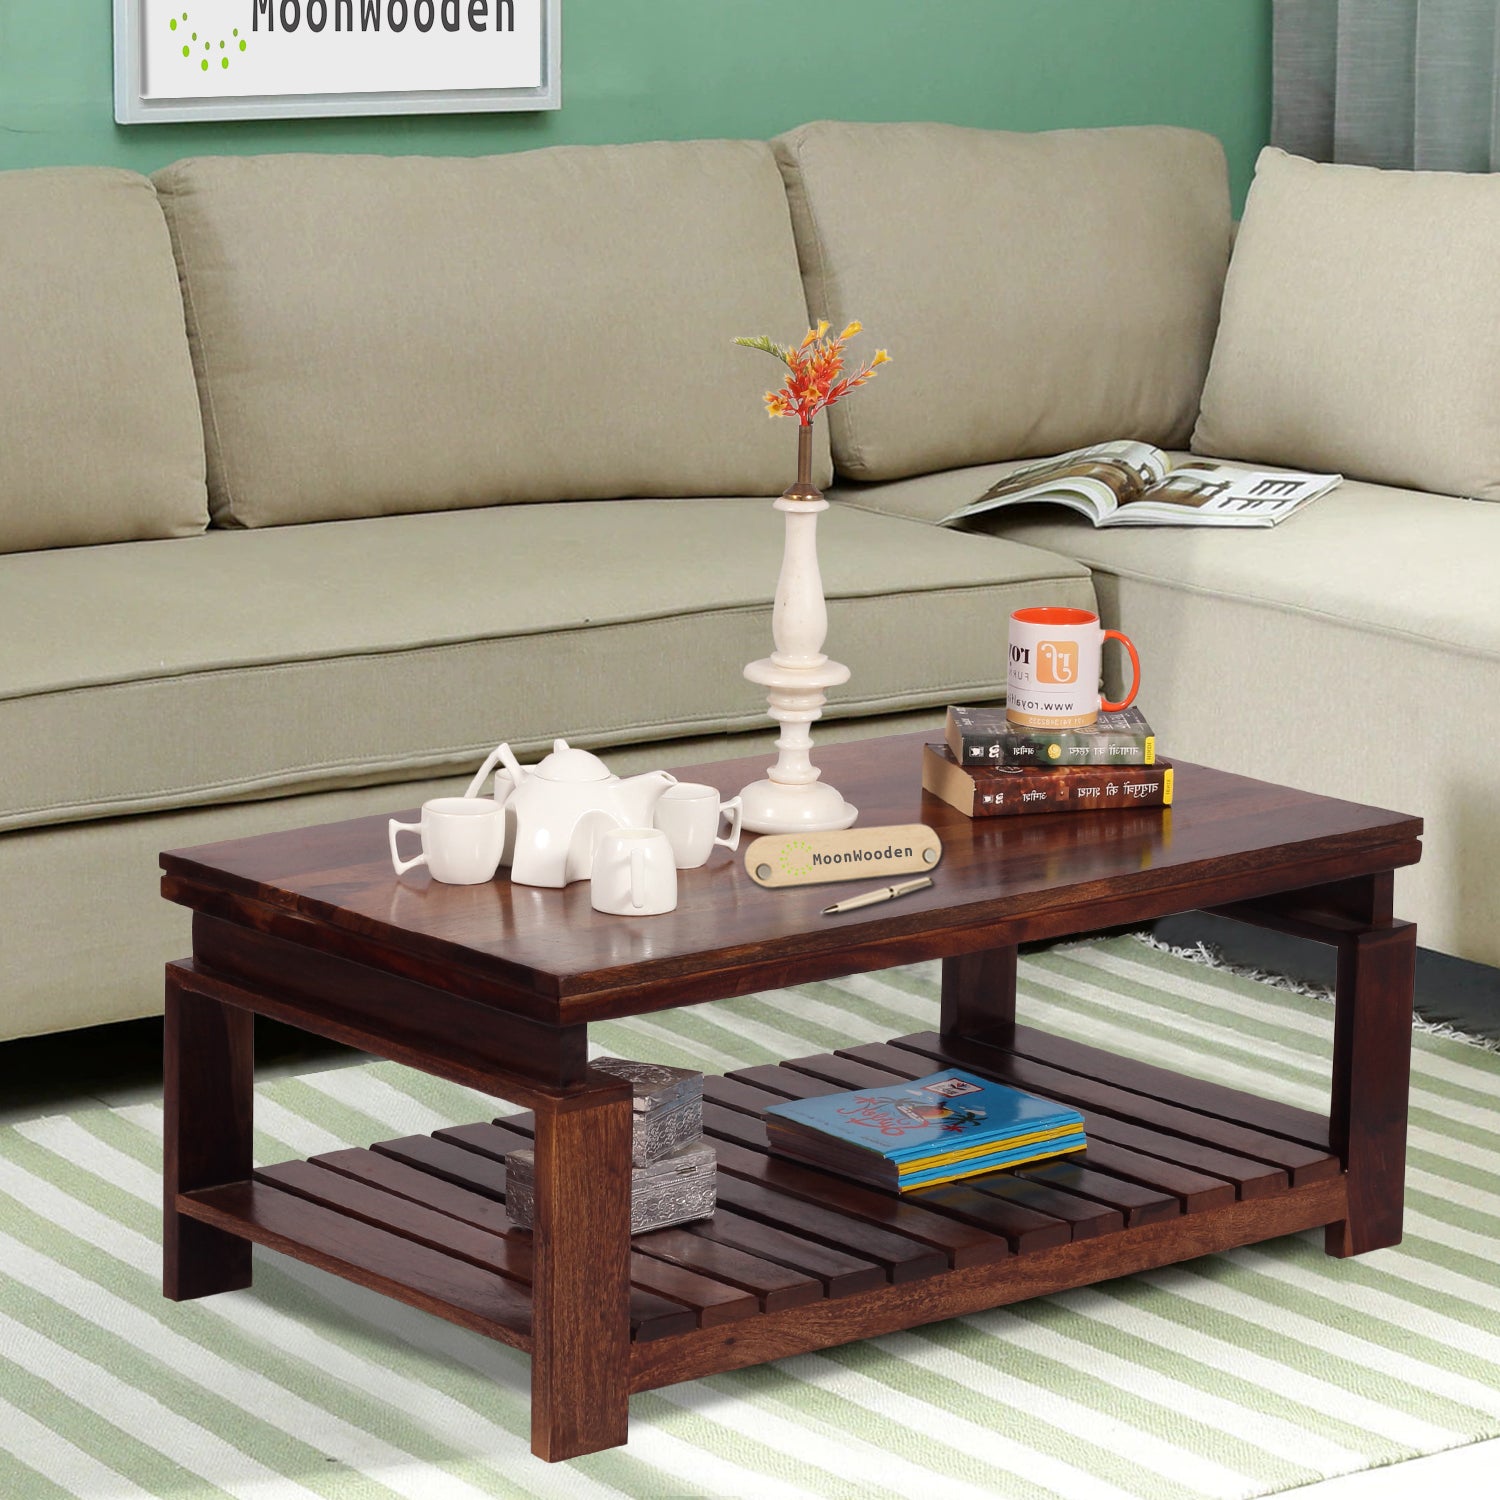 How to Choose the Right Coffee Table